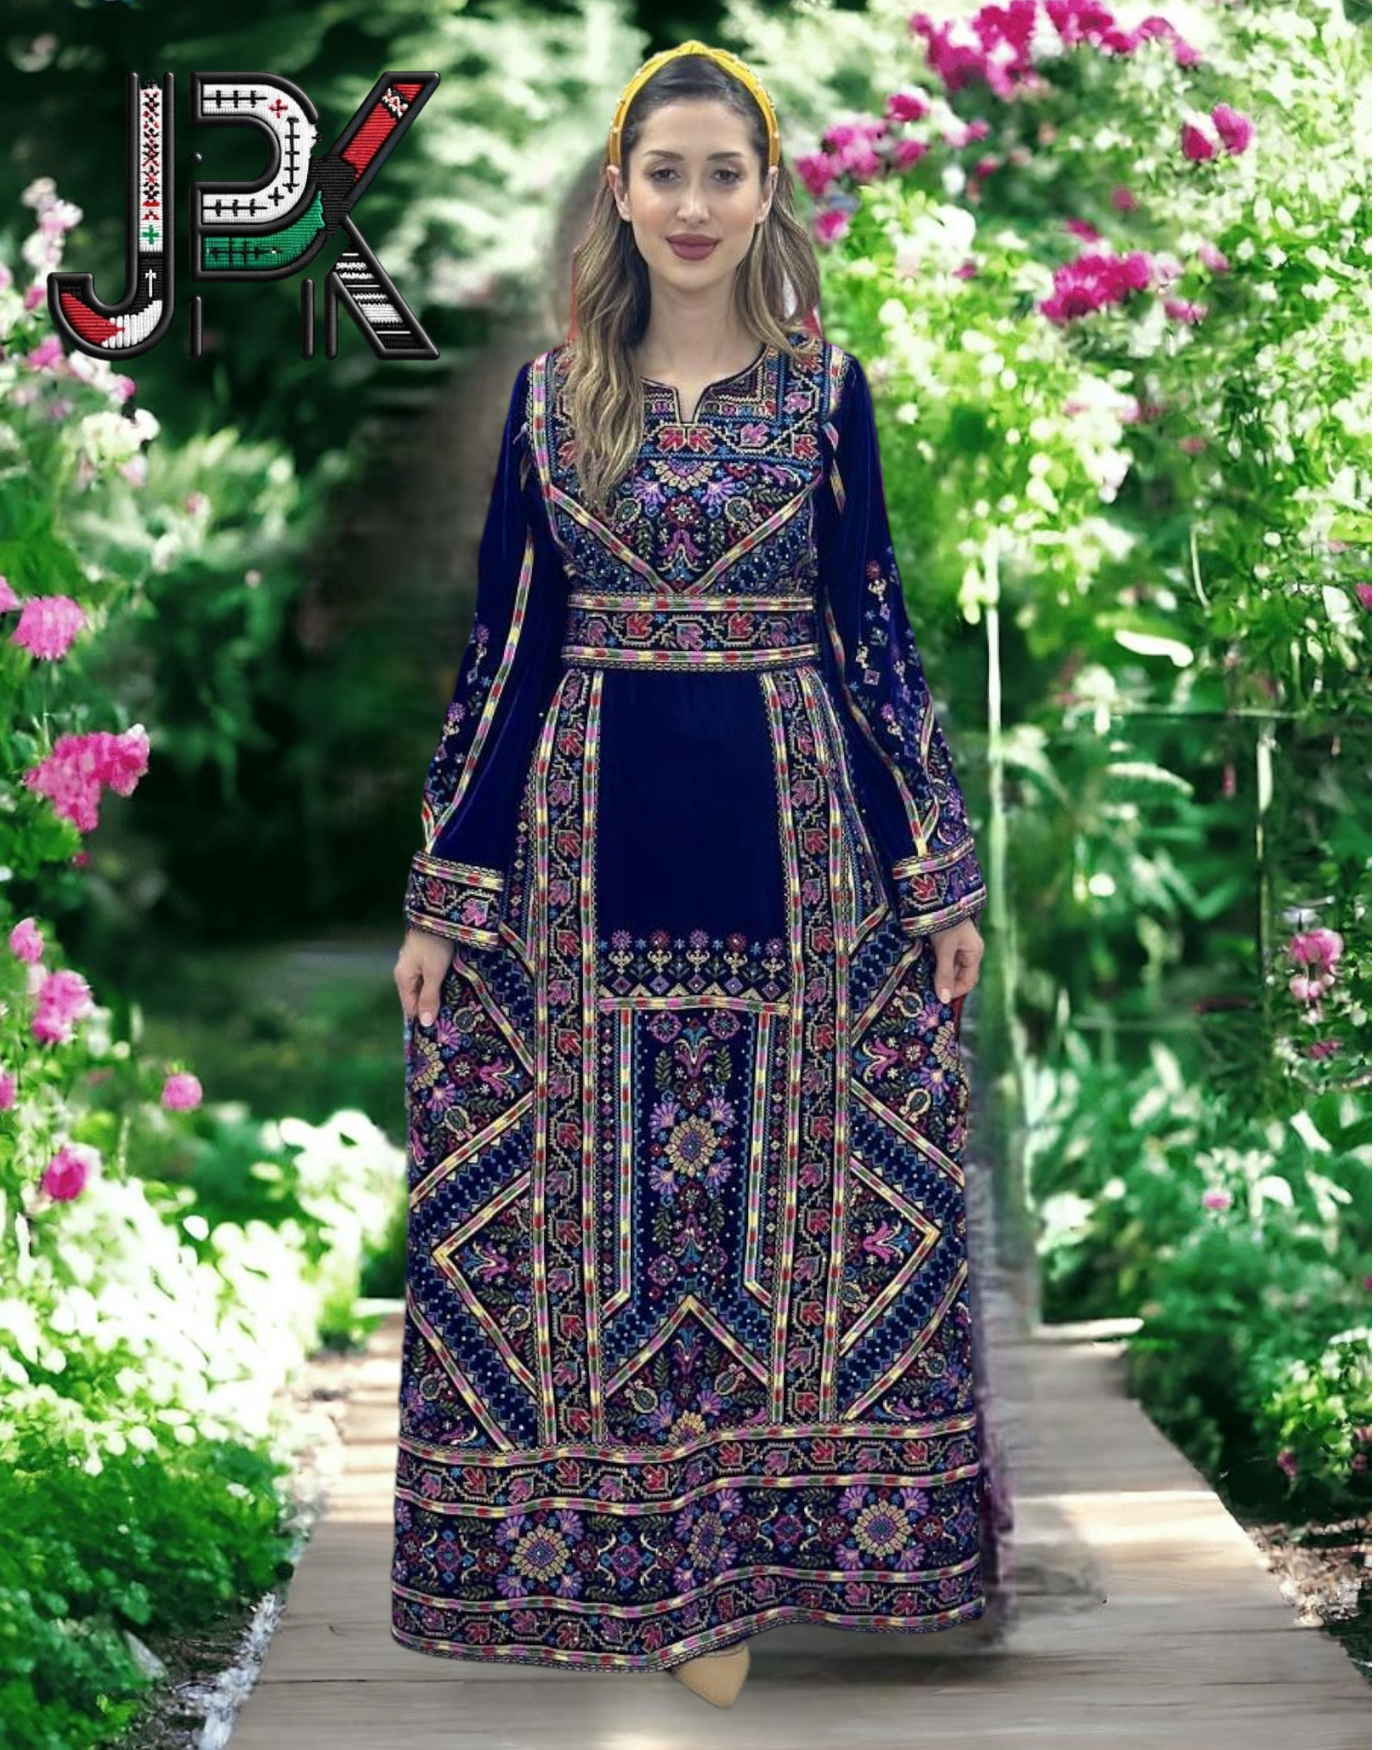 Velvet Queen - Very High Quality Emroidered Palestinian style Thobe